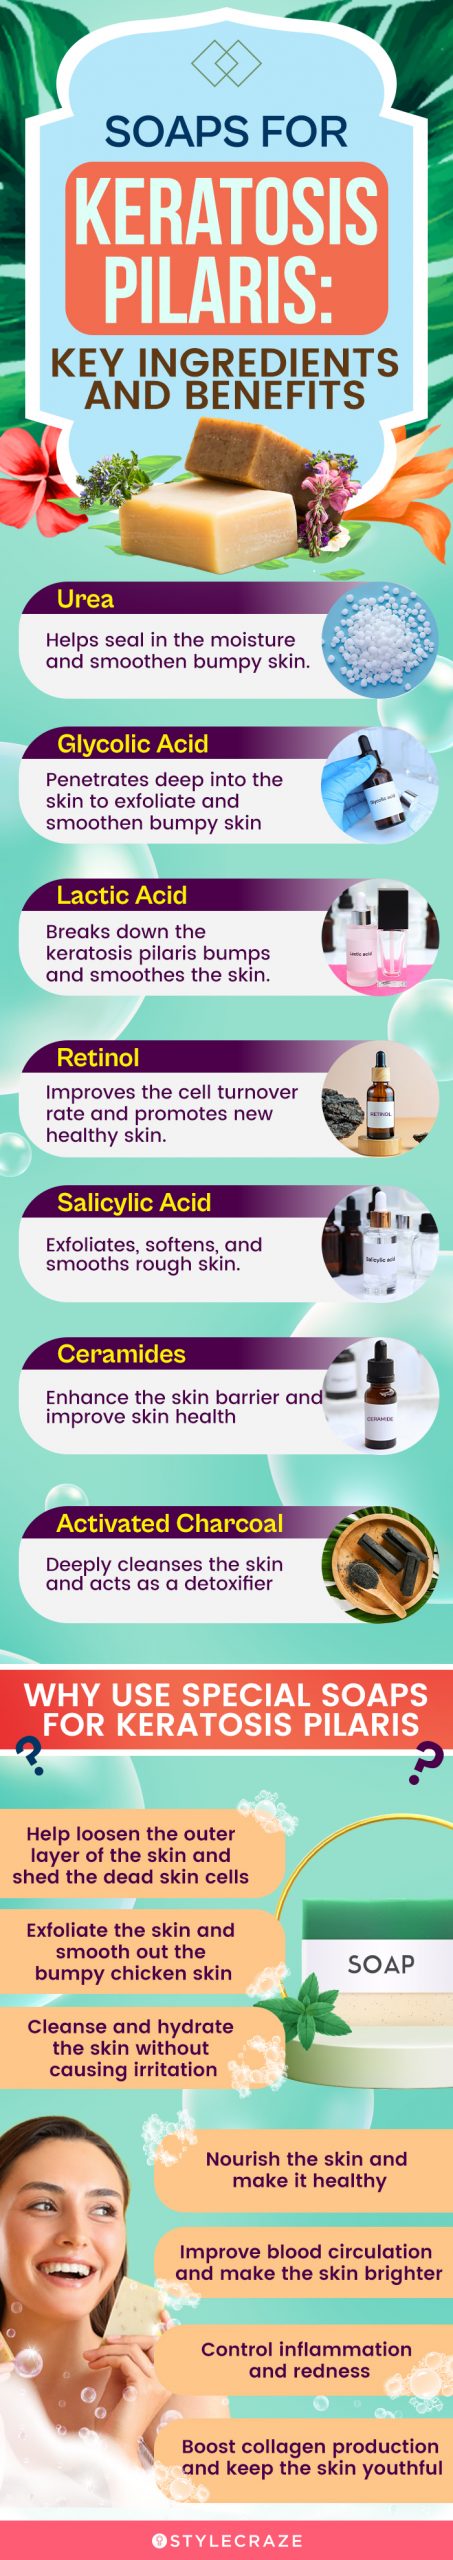 Soaps For Keratosis Pilaris: Key Ingredients And Benefits (infographic)